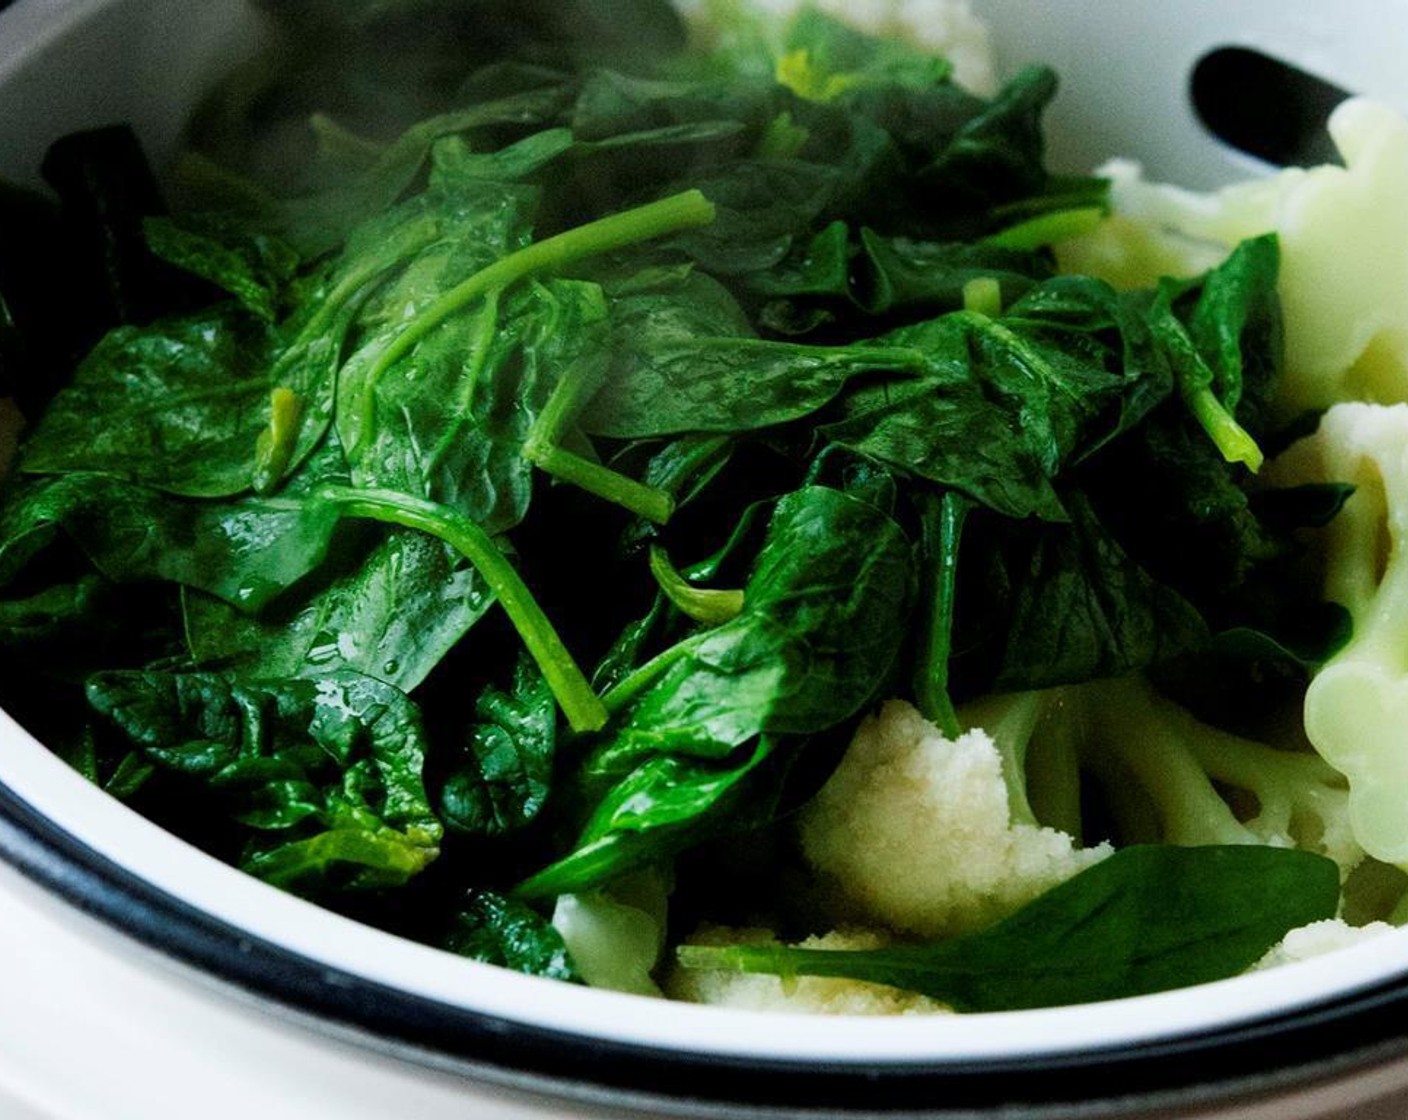 step 2 Wash the Fresh Spinach (1 cup) and place them in the steamer for 2 minutes.